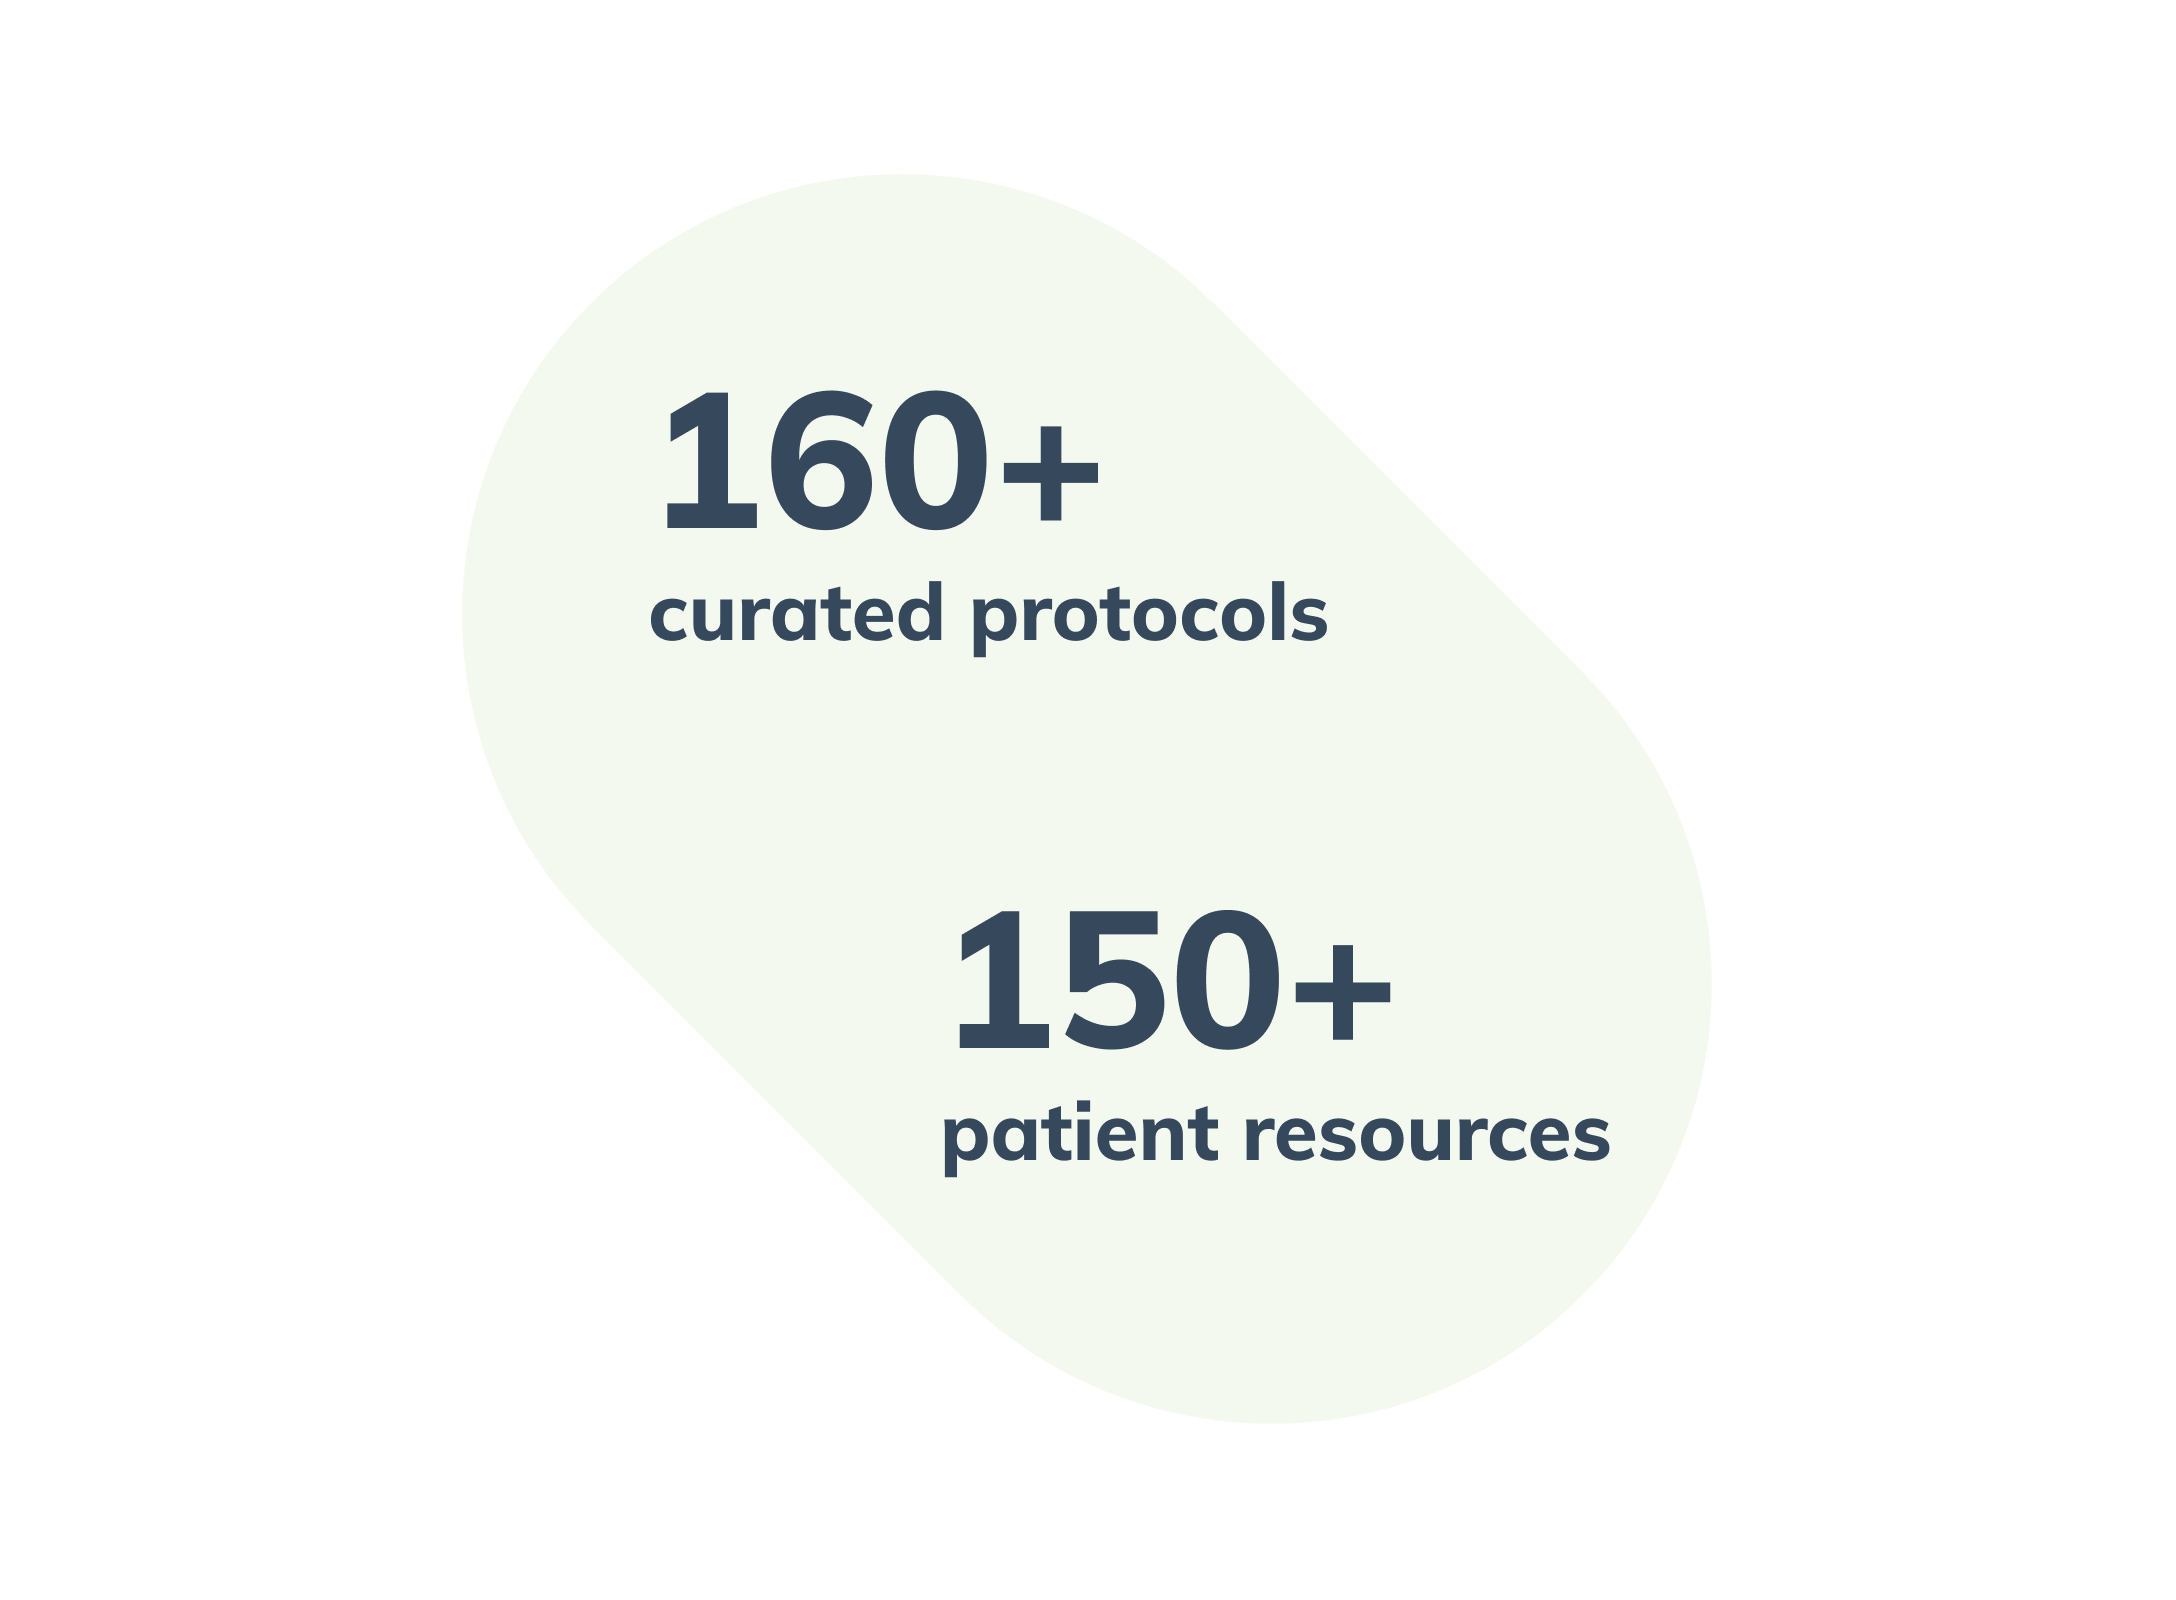 graphic displaying number of Fullscript curated protocols and patient resources